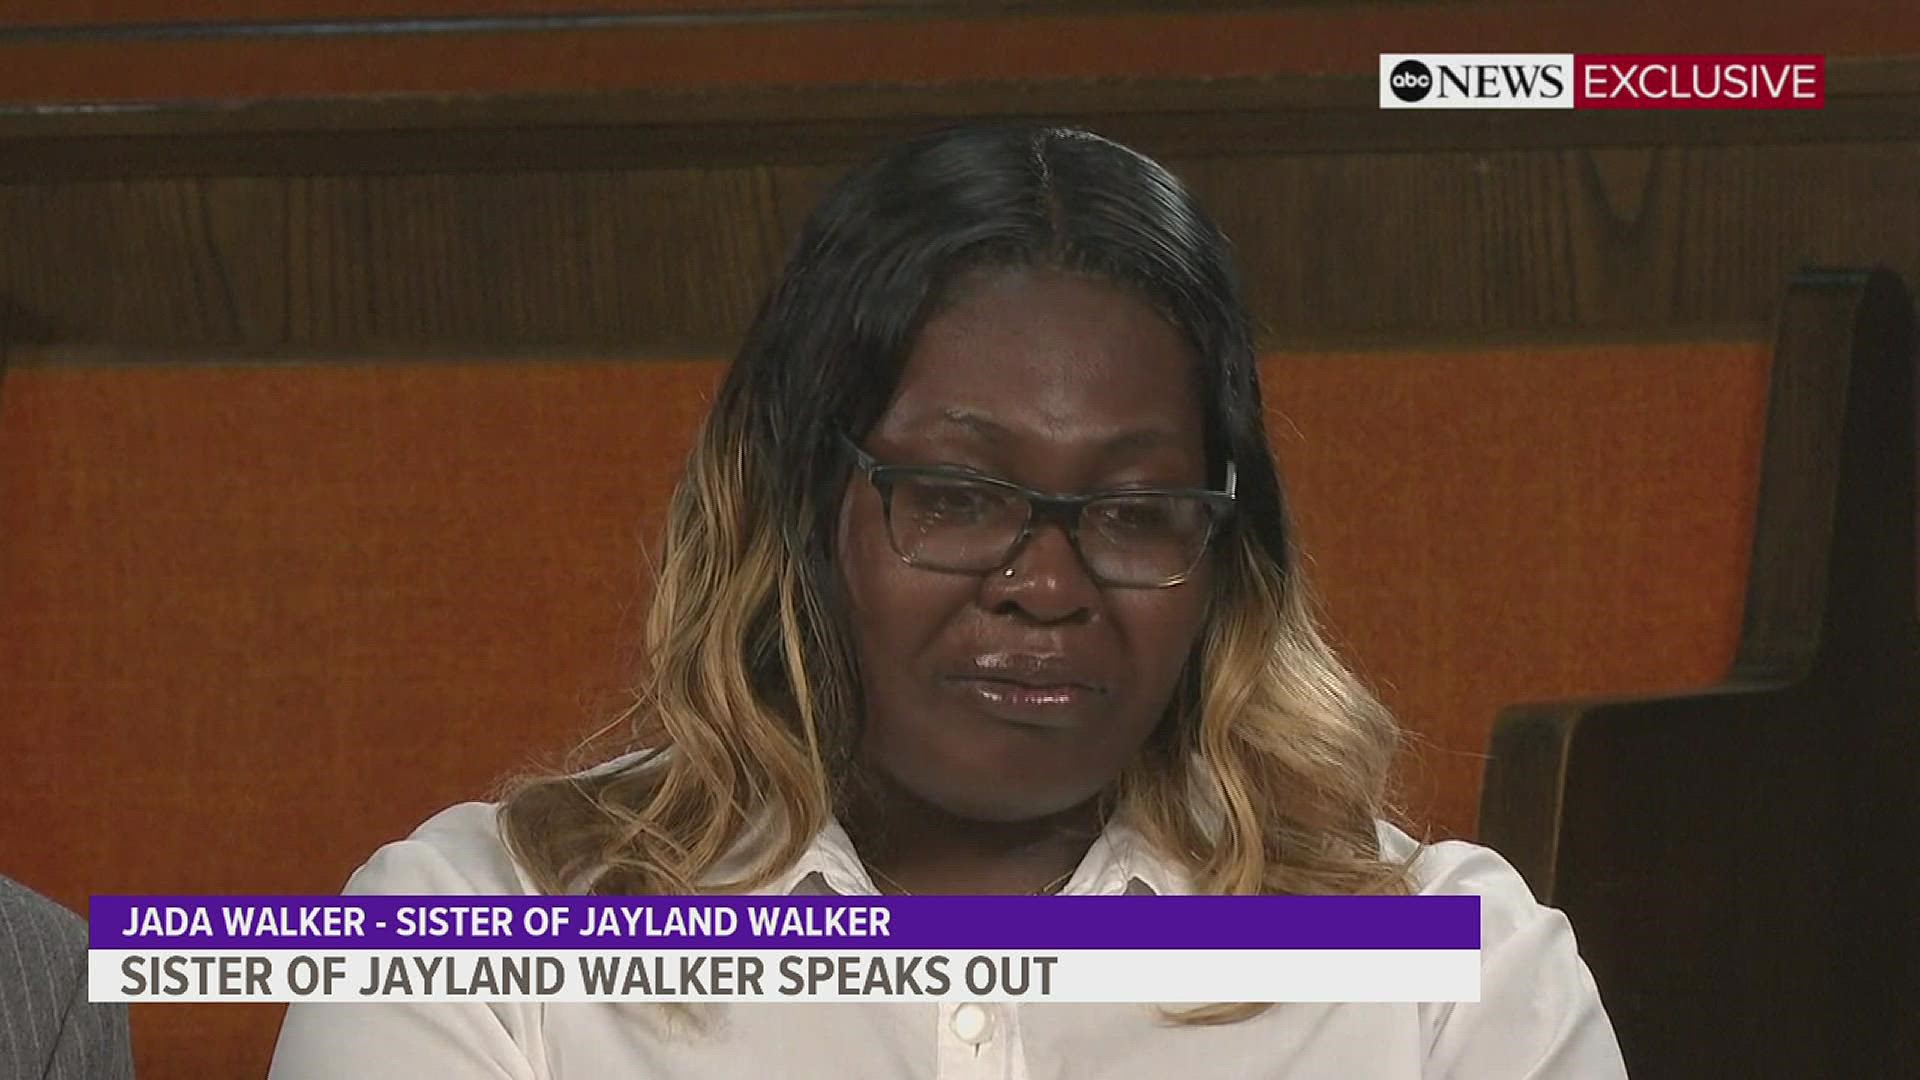 The police shooting victim's sister spoke out following the releasing of bodycam footage showing Akron police shoot Walker over 60 times.